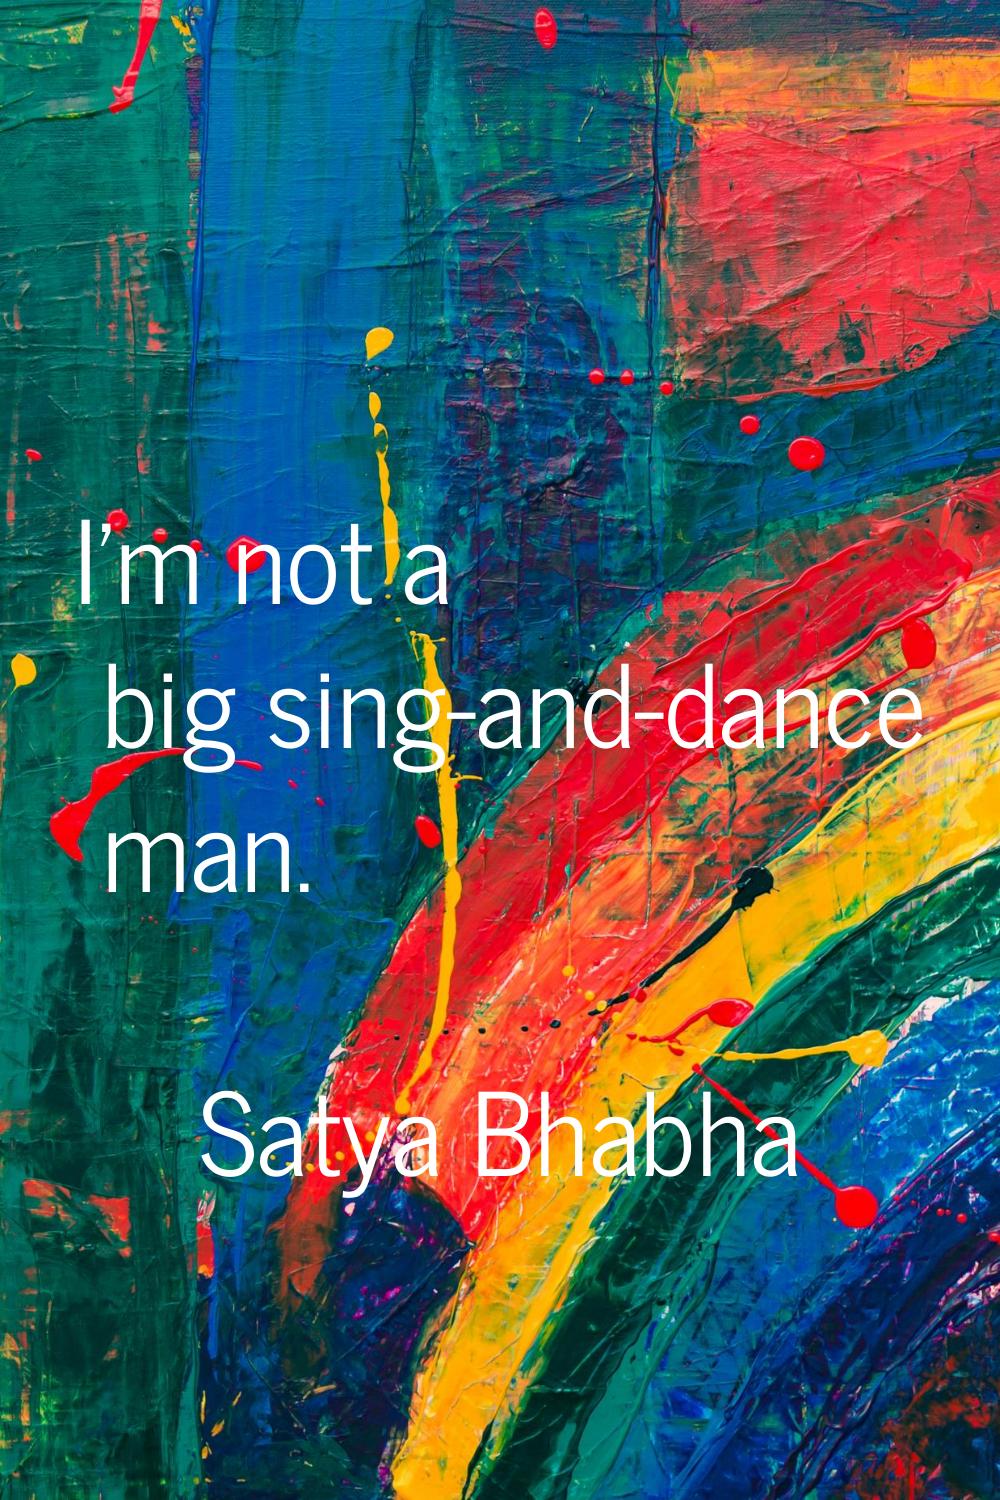 I'm not a big sing-and-dance man.